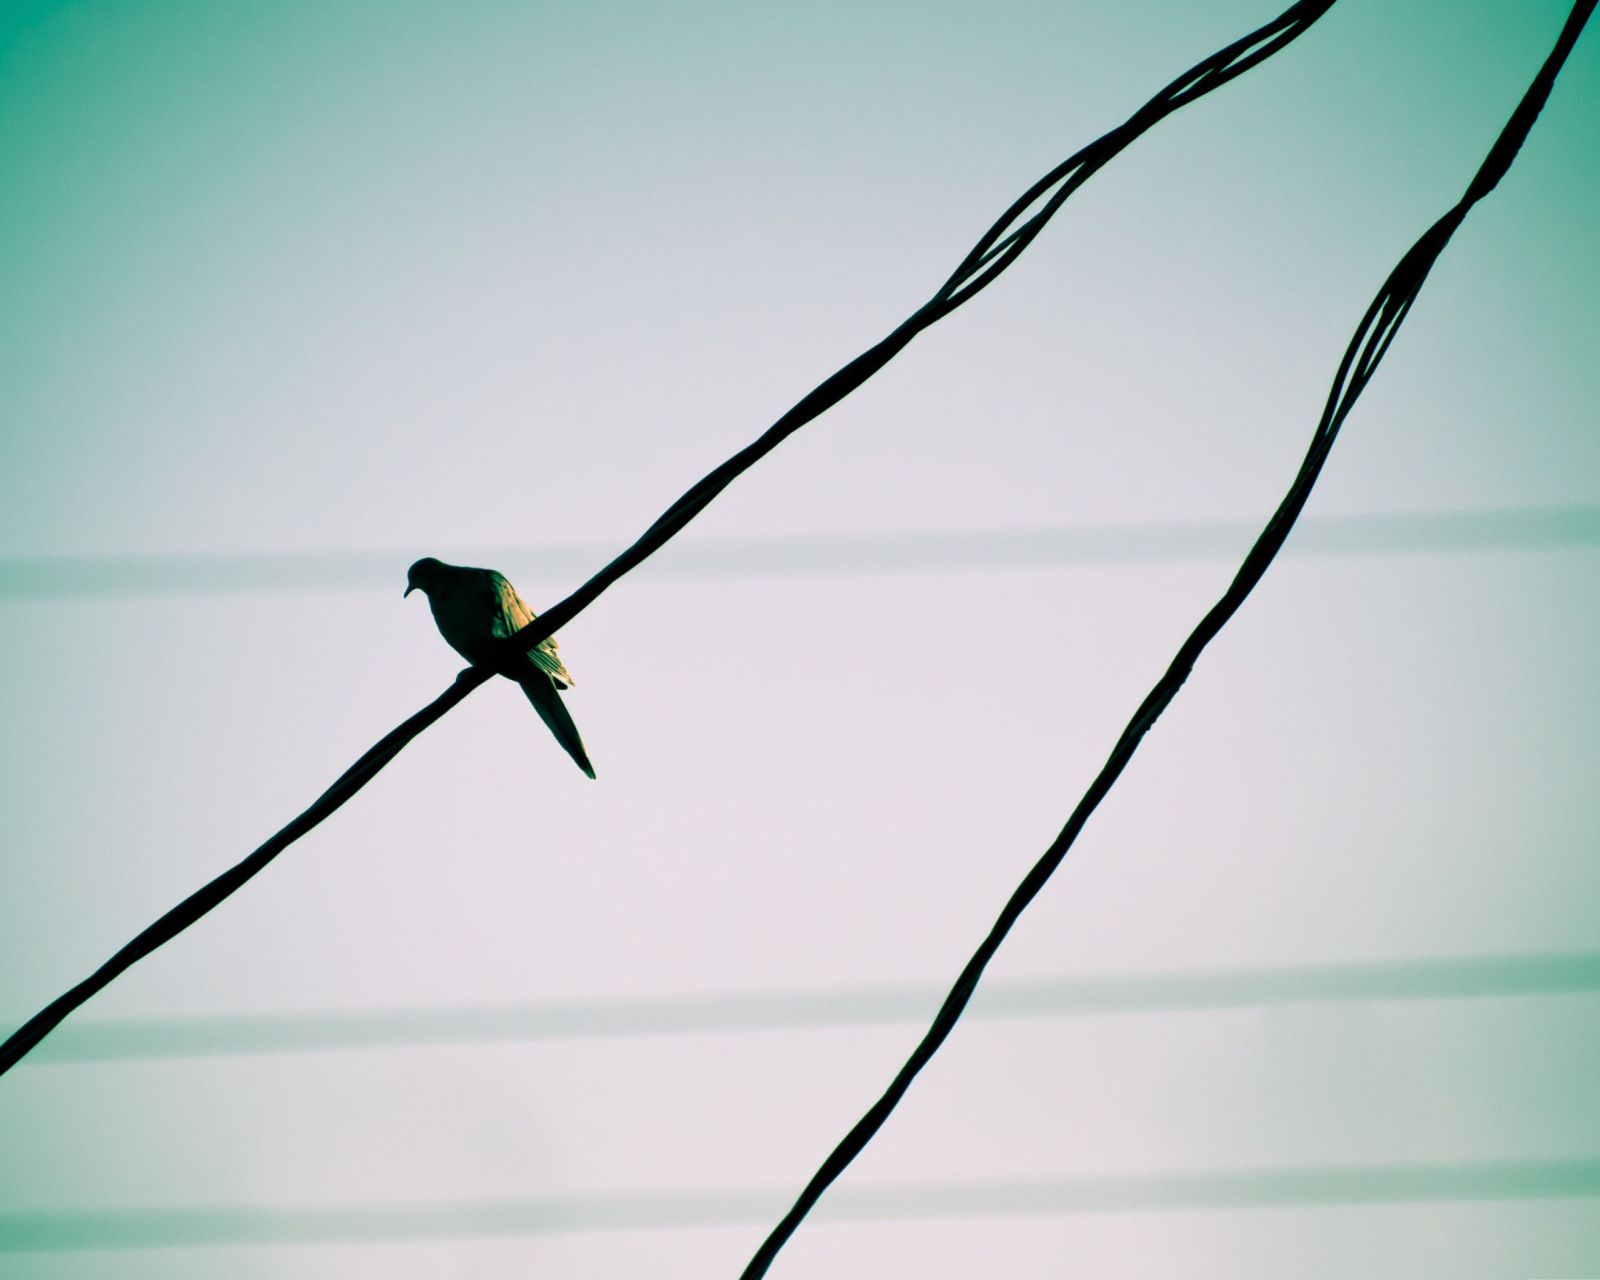 Pigeon On Wire wallpaper 1600x1280